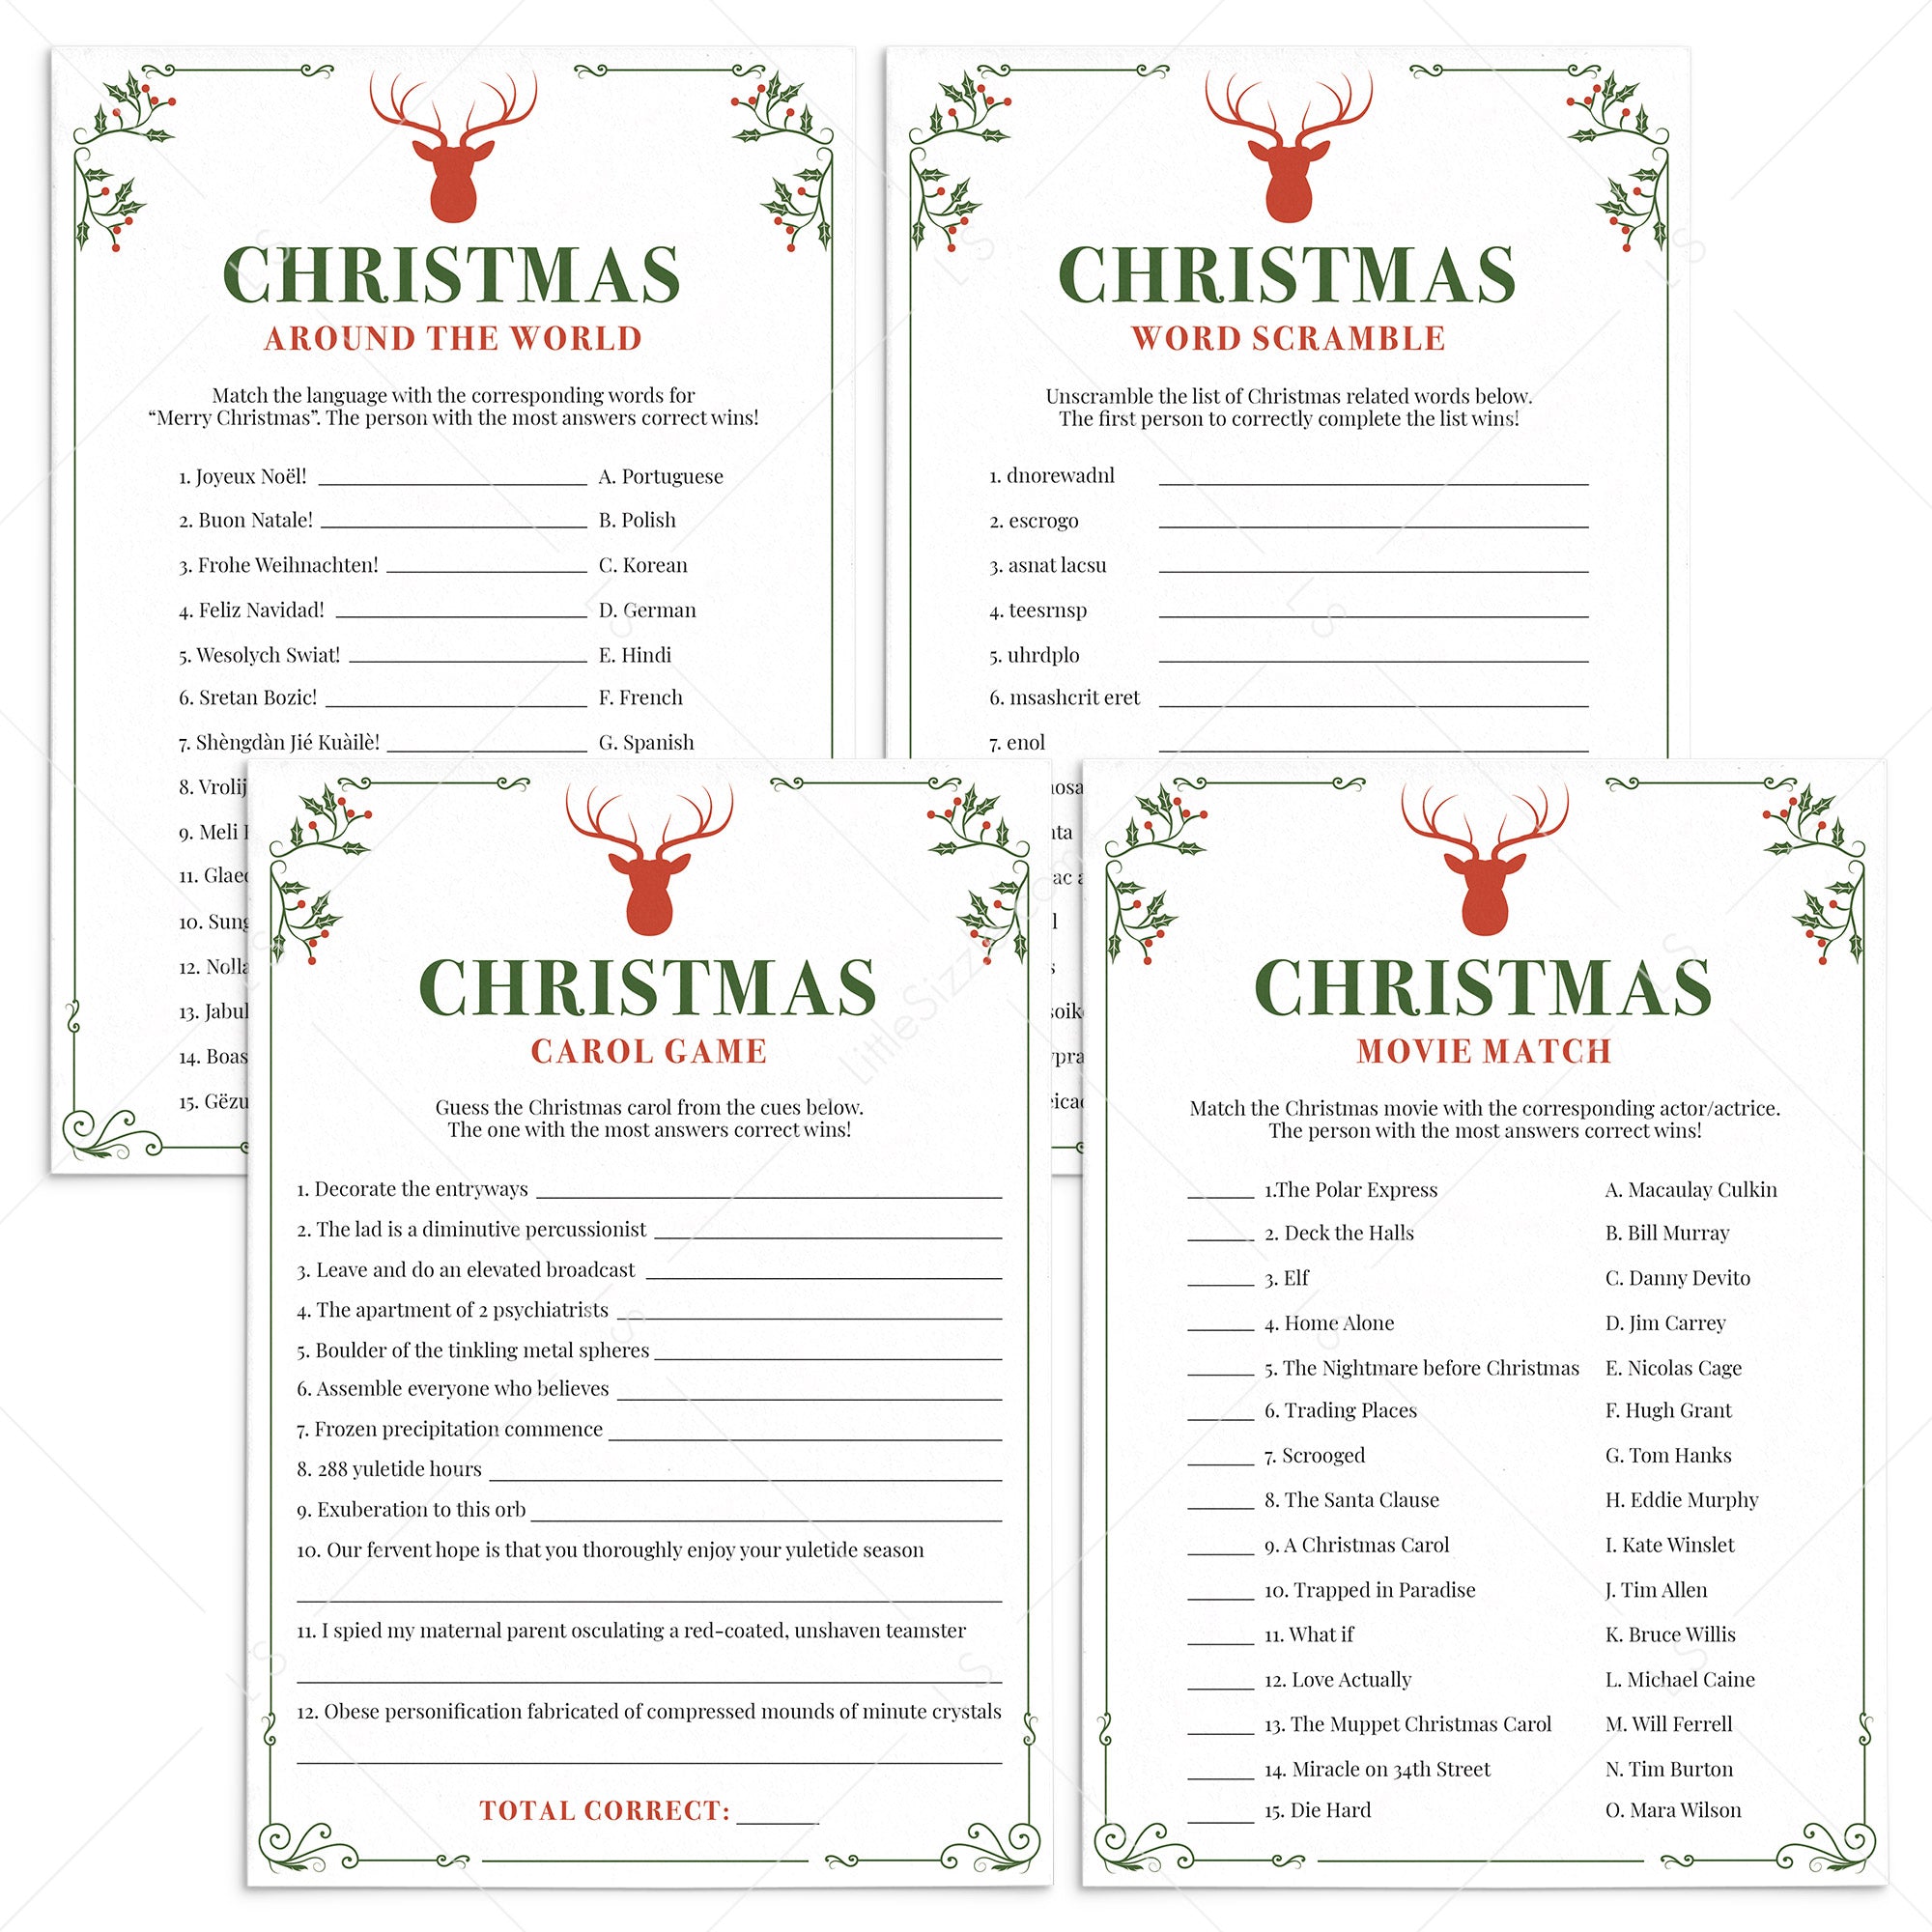 Christmas Office Party Games Bundle Printable by LittleSizzle